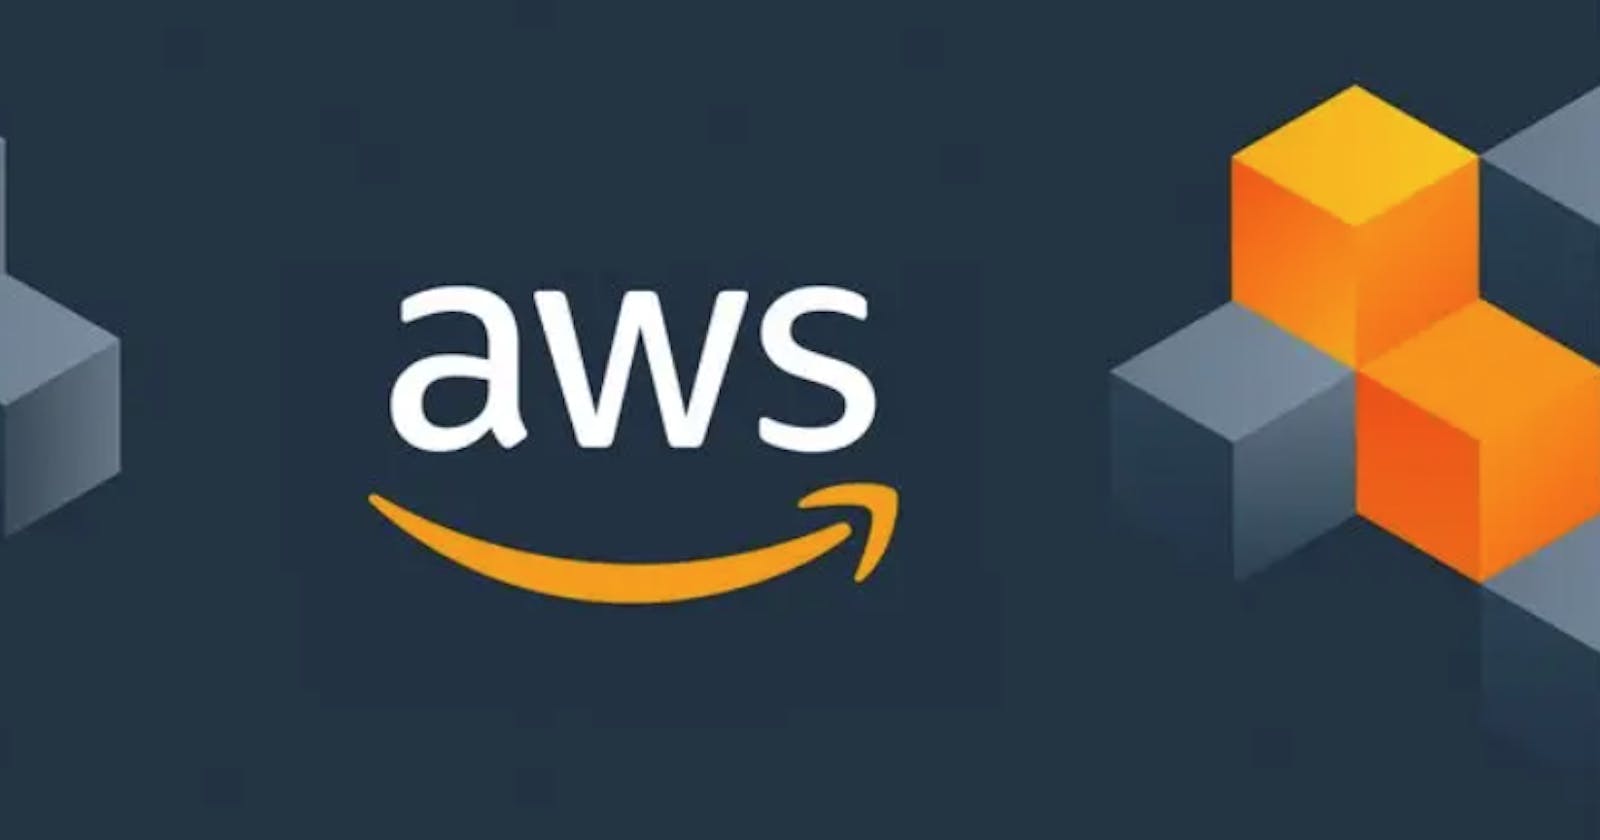 What Is Aws & How To Create An Aws Account?